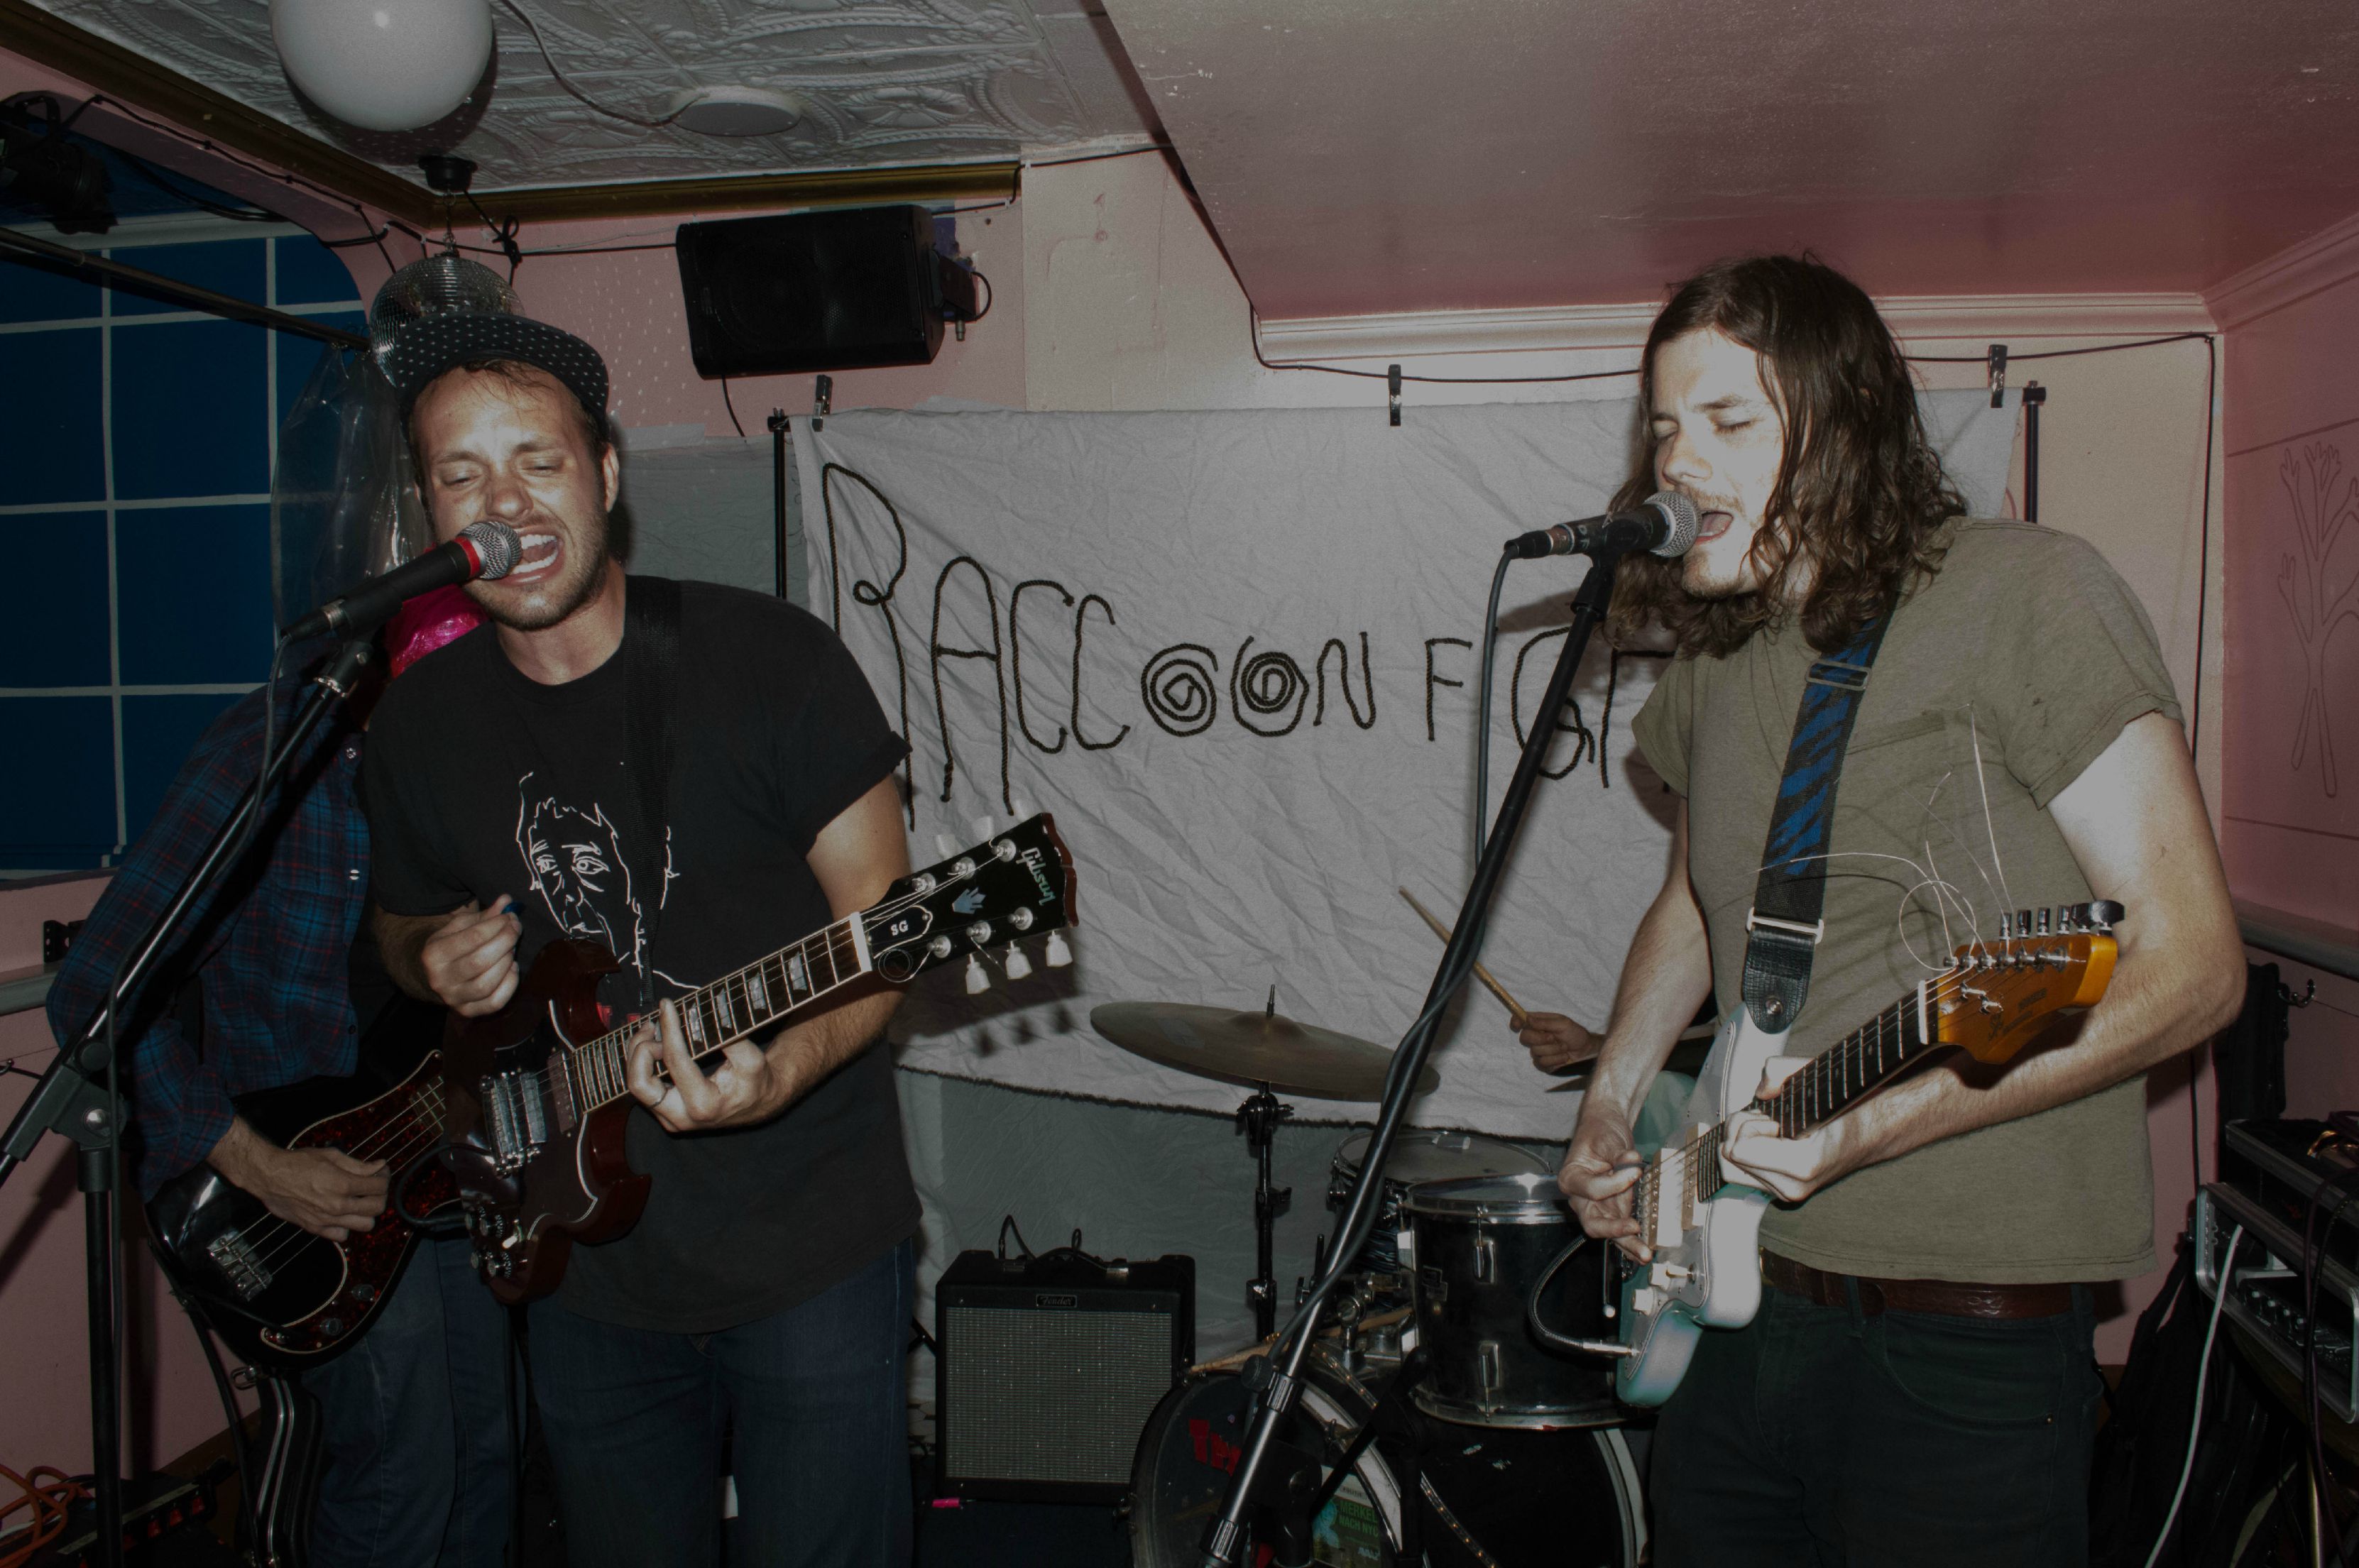 Raccoon Fighter  (NYC Queens band) for No Smoking Media @ Elvis guesthouse